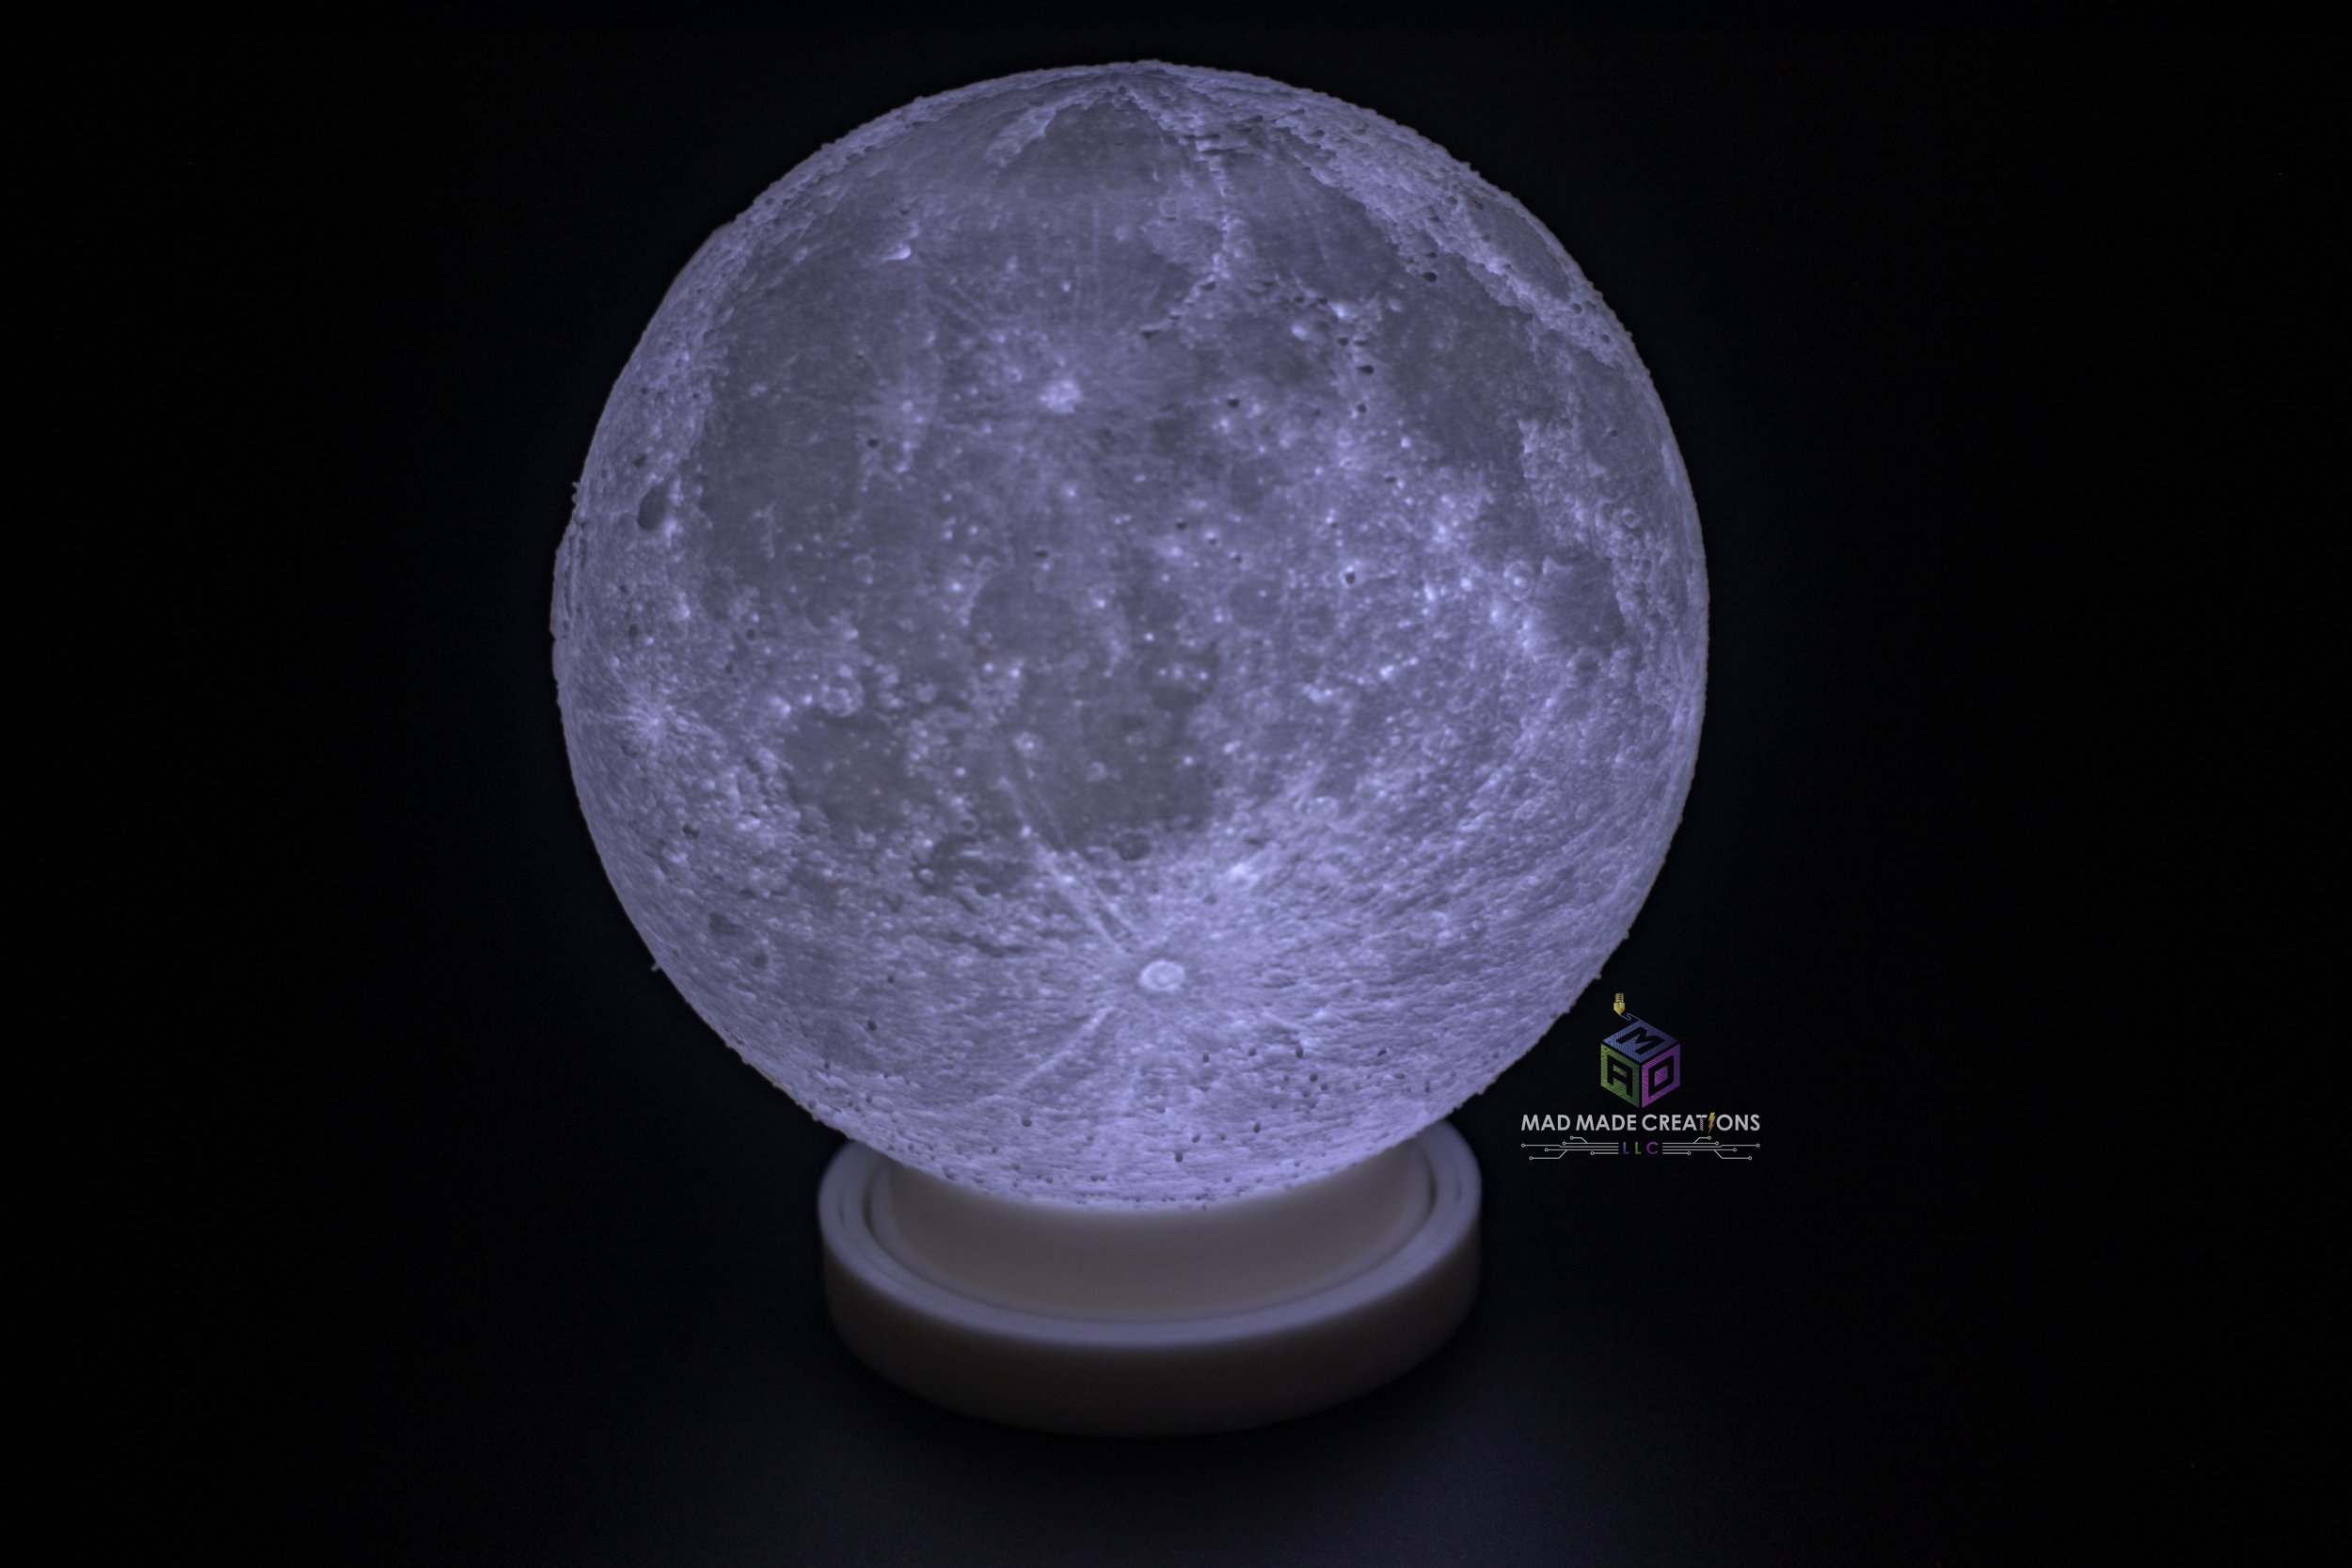 3D　Personalized　3D　—　Printed　Made　LLC　LED　Moon　Creations　Lithophane-MAD　Personalized　Creations　Printed　Moon　Made　MAD　LLC